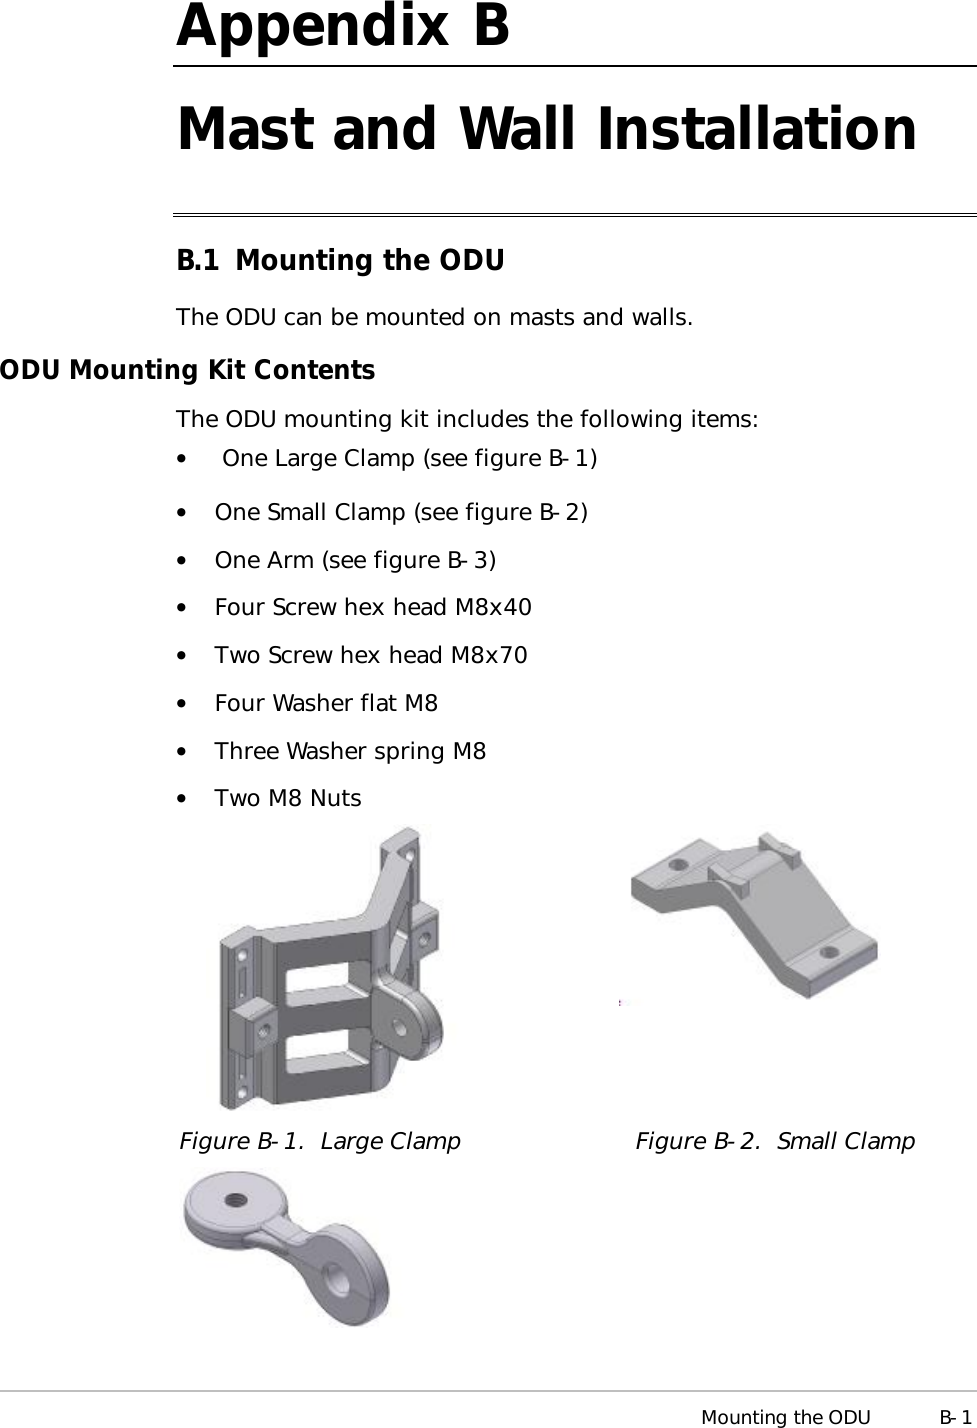  Mounting the ODU B-1 Appendix  B Mast and Wall Installation B.1 Mounting the ODU The ODU can be mounted on masts and walls. ODU Mounting Kit Contents The ODU mounting kit includes the following items: •   One Large Clamp (see figure B-1) •  One Small Clamp (see figure B-2) •  One Arm (see figure B-3) •  Four Screw hex head M8x40 •  Two Screw hex head M8x70 •  Four Washer flat M8 •  Three Washer spring M8 •  Two M8 Nuts   Figure  B-1.  Large Clamp Figure  B-2.  Small Clamp    